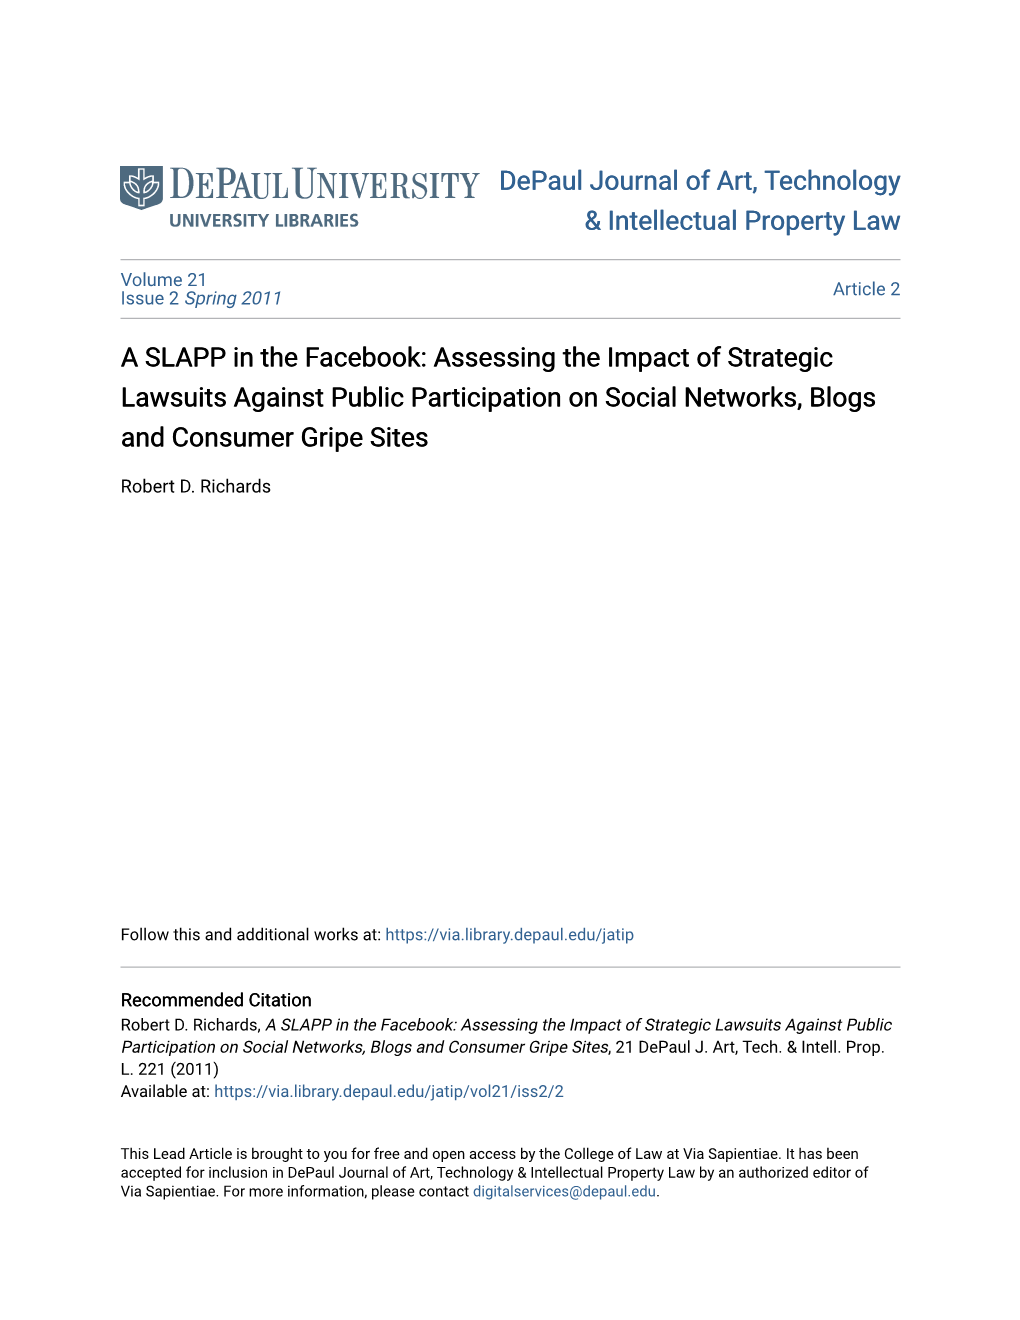 A SLAPP in the Facebook: Assessing the Impact of Strategic Lawsuits Against Public Participation on Social Networks, Blogs and Consumer Gripe Sites